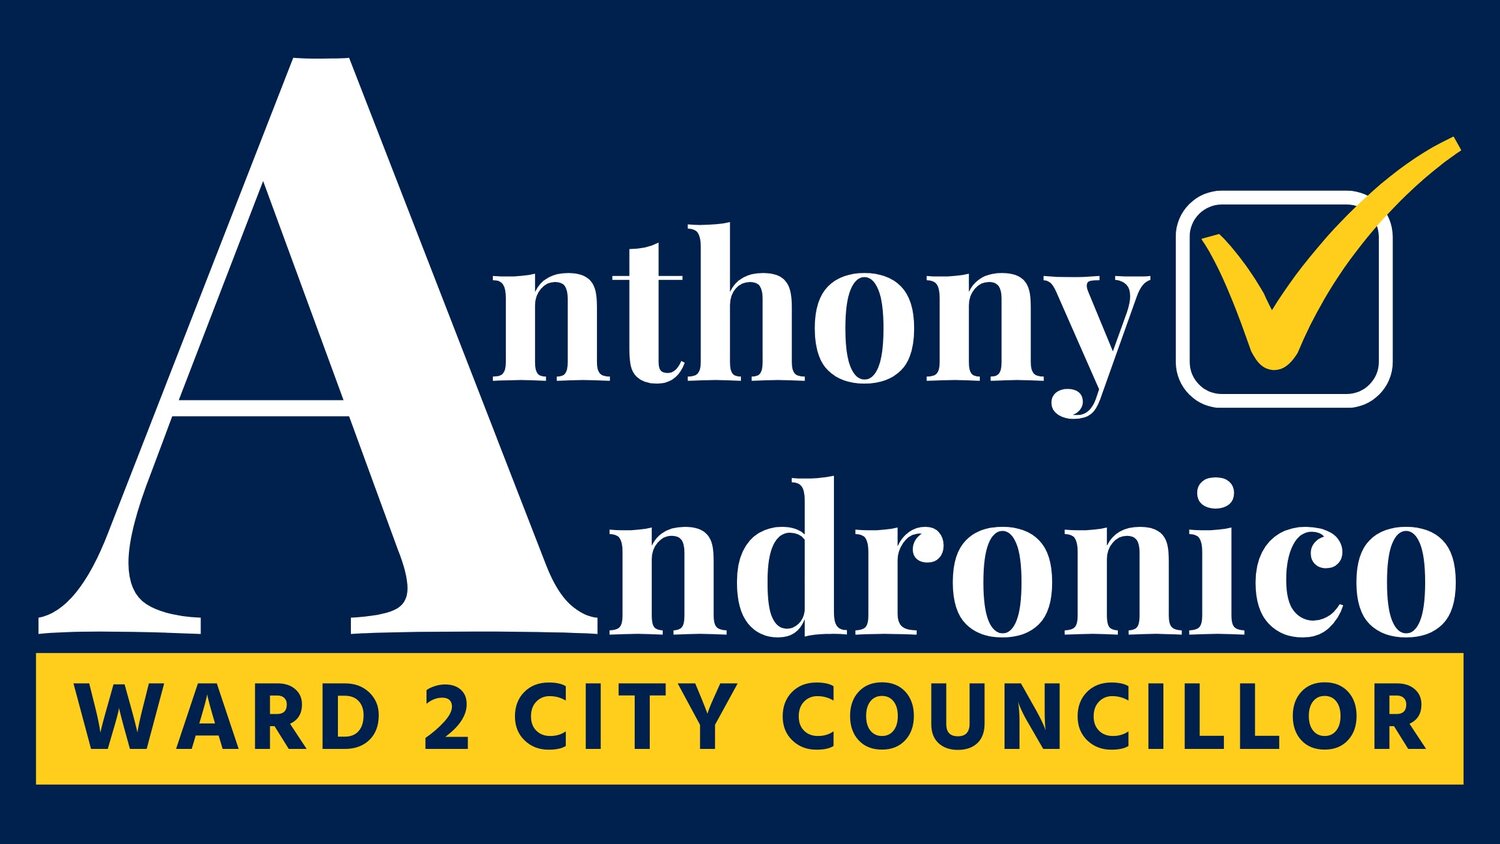 Anthony Andronico - Ward 2 City Councillor